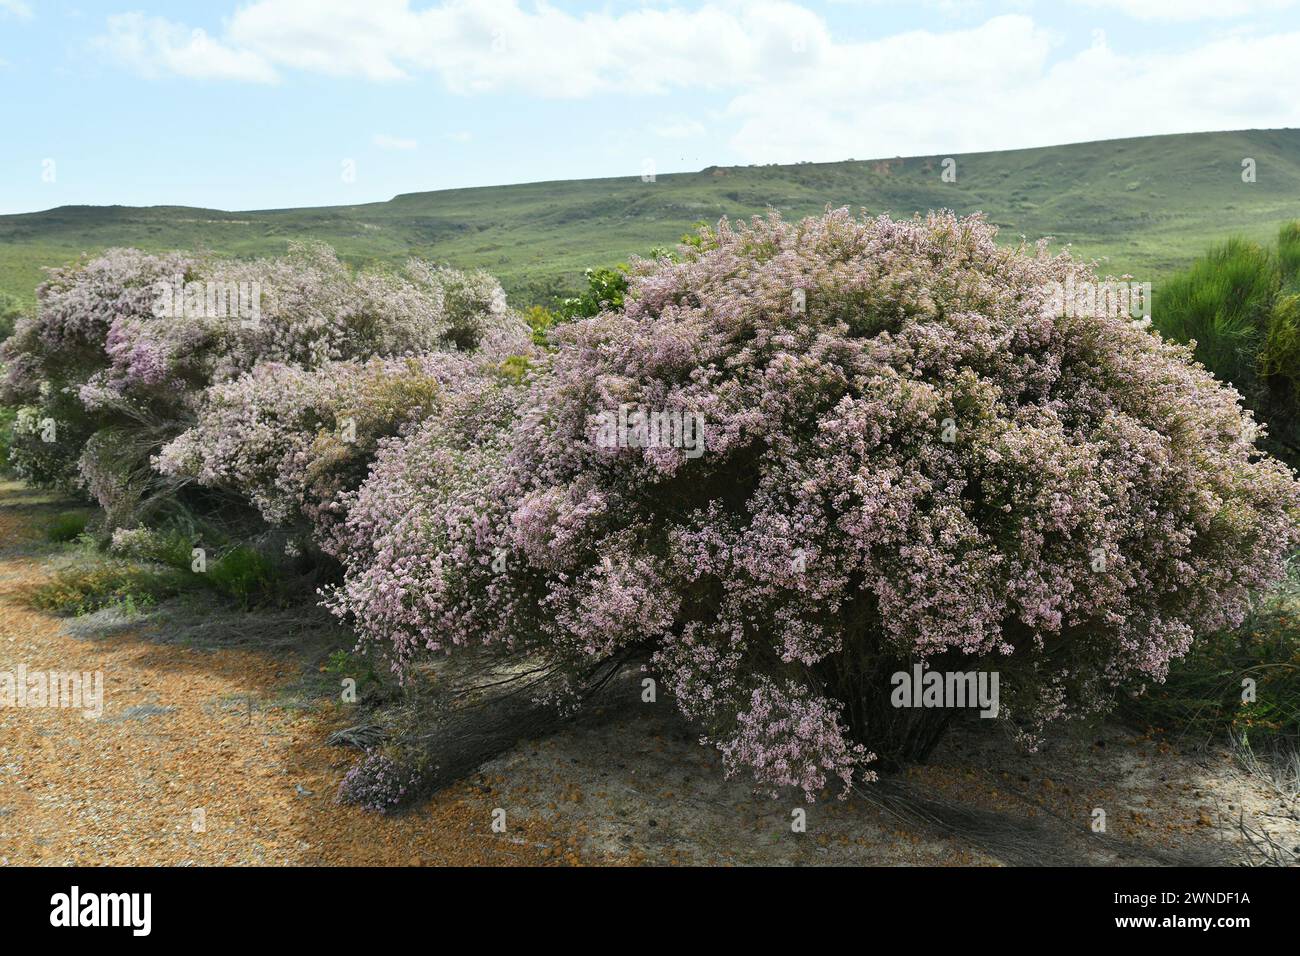 Landscape in Lesueur National Park with flowering shrubs in the foreground Stock Photo